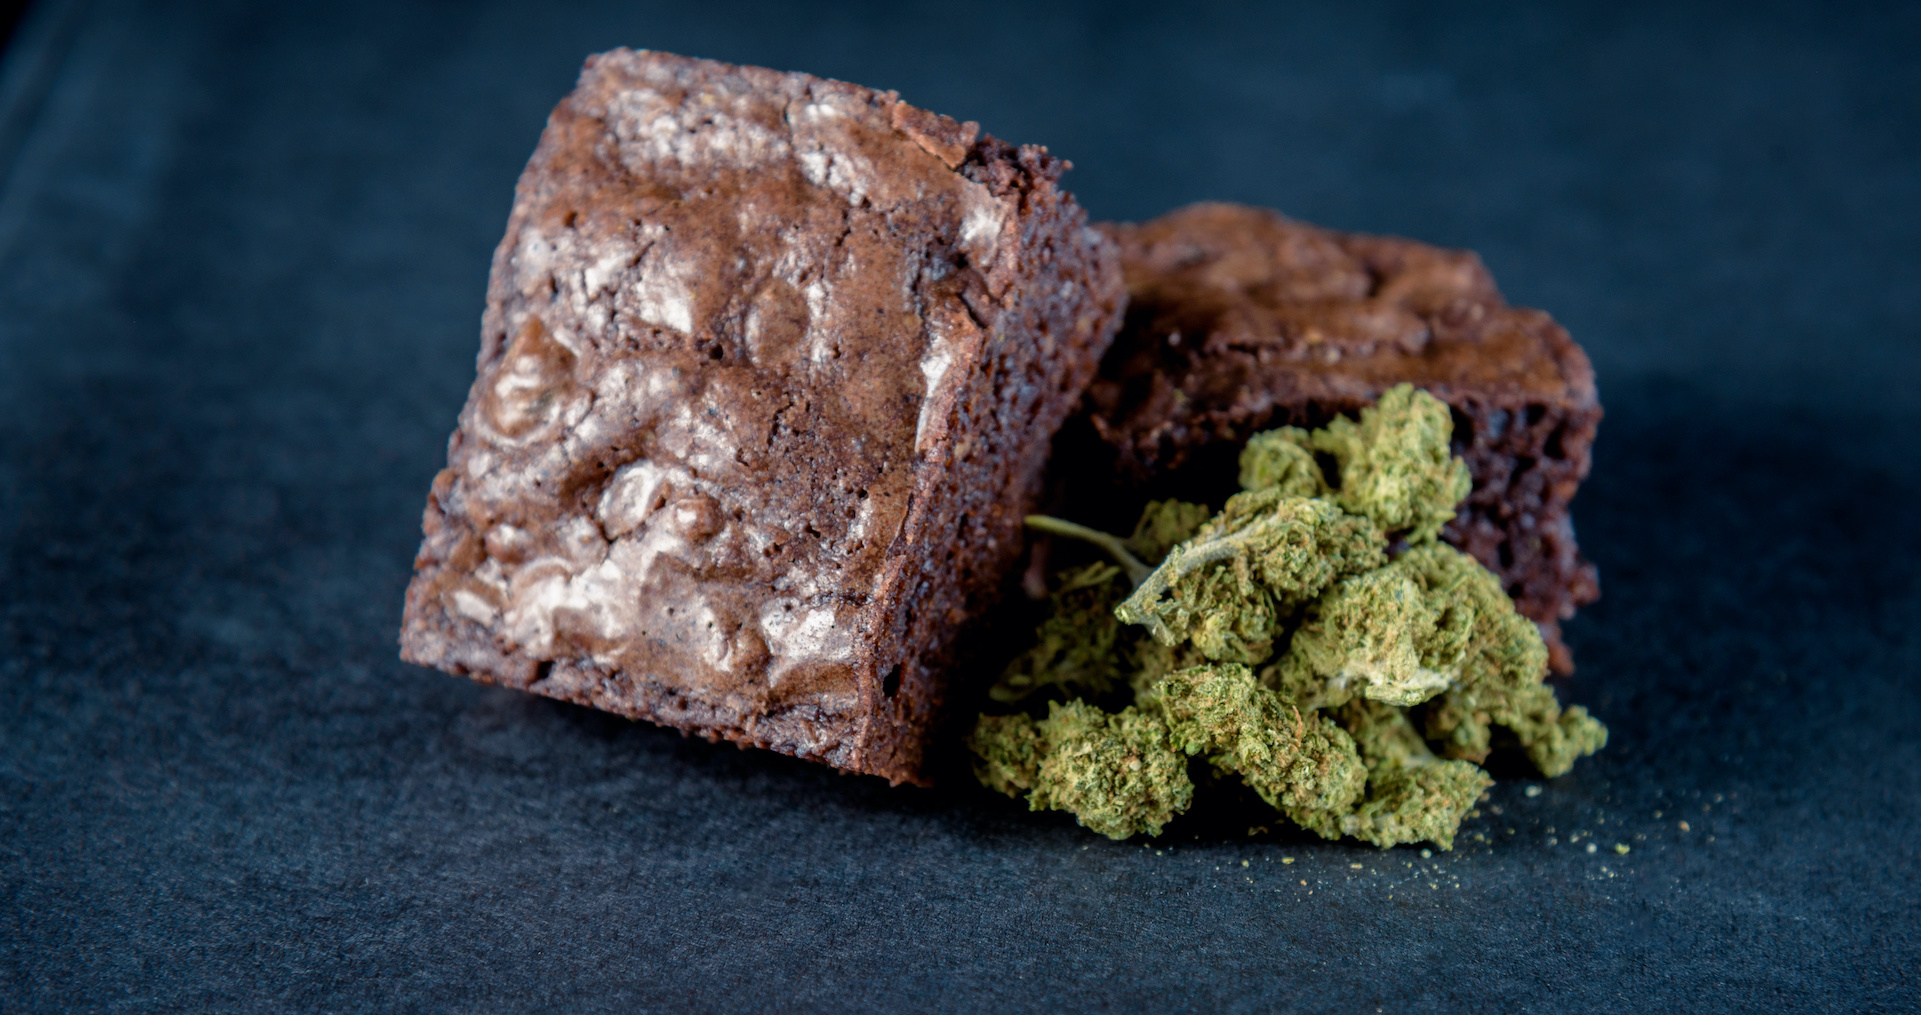 How long do edibles take to kick in?